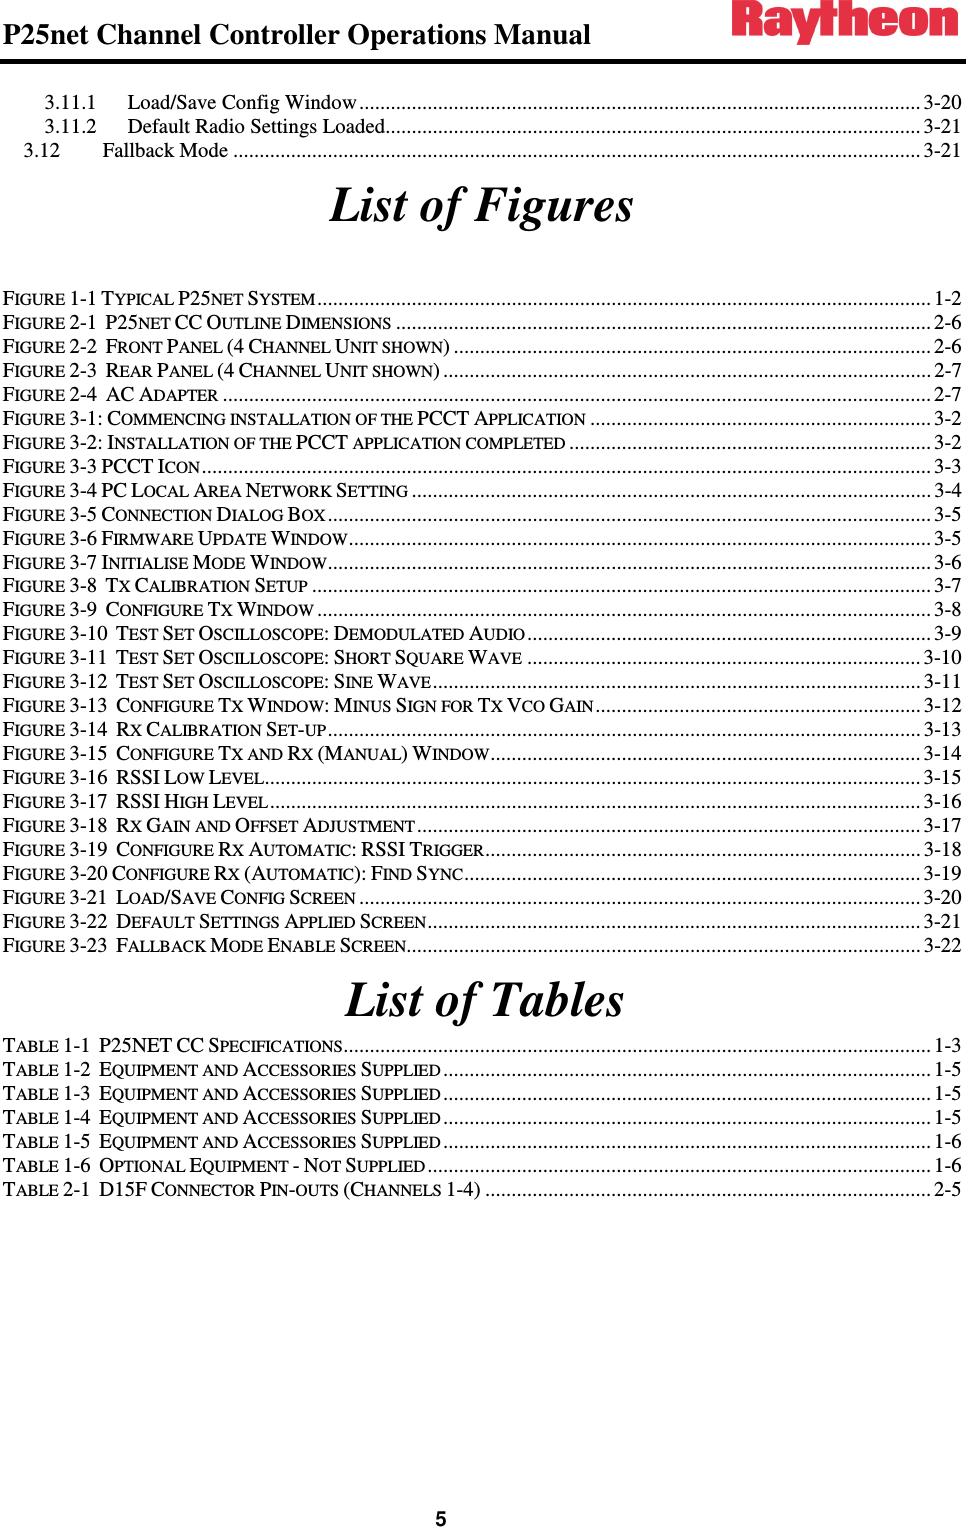 P25net Channel Controller Operations Manual                                                                                                   5 3.11.1 Load/Save Config Window ........................................................................................................... 3-20 3.11.2 Default Radio Settings Loaded...................................................................................................... 3-21 3.12 Fallback Mode ................................................................................................................................... 3-21 List of Figures  FIGURE 1-1 TYPICAL P25NET SYSTEM ..................................................................................................................... 1-2 FIGURE 2-1  P25NET CC OUTLINE DIMENSIONS ...................................................................................................... 2-6 FIGURE 2-2  FRONT PANEL (4 CHANNEL UNIT SHOWN) ........................................................................................... 2-6 FIGURE 2-3  REAR PANEL (4 CHANNEL UNIT SHOWN) ............................................................................................. 2-7 FIGURE 2-4  AC ADAPTER ....................................................................................................................................... 2-7 FIGURE 3-1: COMMENCING INSTALLATION OF THE PCCT APPLICATION ................................................................. 3-2 FIGURE 3-2: INSTALLATION OF THE PCCT APPLICATION COMPLETED ..................................................................... 3-2 FIGURE 3-3 PCCT ICON ........................................................................................................................................... 3-3 FIGURE 3-4 PC LOCAL AREA NETWORK SETTING ................................................................................................... 3-4 FIGURE 3-5 CONNECTION DIALOG BOX ................................................................................................................... 3-5 FIGURE 3-6 FIRMWARE UPDATE WINDOW ............................................................................................................... 3-5 FIGURE 3-7 INITIALISE MODE WINDOW ................................................................................................................... 3-6 FIGURE 3-8  TX CALIBRATION SETUP ...................................................................................................................... 3-7 FIGURE 3-9  CONFIGURE TX WINDOW ..................................................................................................................... 3-8 FIGURE 3-10  TEST SET OSCILLOSCOPE: DEMODULATED AUDIO ............................................................................. 3-9 FIGURE 3-11  TEST SET OSCILLOSCOPE: SHORT SQUARE WAVE ........................................................................... 3-10 FIGURE 3-12  TEST SET OSCILLOSCOPE: SINE WAVE ............................................................................................. 3-11 FIGURE 3-13  CONFIGURE TX WINDOW: MINUS SIGN FOR TX VCO GAIN .............................................................. 3-12 FIGURE 3-14  RX CALIBRATION SET-UP ................................................................................................................. 3-13 FIGURE 3-15  CONFIGURE TX AND RX (MANUAL) WINDOW .................................................................................. 3-14 FIGURE 3-16  RSSI LOW LEVEL ............................................................................................................................. 3-15 FIGURE 3-17  RSSI HIGH LEVEL ............................................................................................................................ 3-16 FIGURE 3-18  RX GAIN AND OFFSET ADJUSTMENT ................................................................................................ 3-17 FIGURE 3-19  CONFIGURE RX AUTOMATIC: RSSI TRIGGER ................................................................................... 3-18 FIGURE 3-20 CONFIGURE RX (AUTOMATIC): FIND SYNC ....................................................................................... 3-19 FIGURE 3-21  LOAD/SAVE CONFIG SCREEN ........................................................................................................... 3-20 FIGURE 3-22  DEFAULT SETTINGS APPLIED SCREEN .............................................................................................. 3-21 FIGURE 3-23  FALLBACK MODE ENABLE SCREEN .................................................................................................. 3-22  List of Tables TABLE 1-1  P25NET CC SPECIFICATIONS ................................................................................................................ 1-3 TABLE 1-2  EQUIPMENT AND ACCESSORIES SUPPLIED ............................................................................................. 1-5 TABLE 1-3  EQUIPMENT AND ACCESSORIES SUPPLIED ............................................................................................. 1-5 TABLE 1-4  EQUIPMENT AND ACCESSORIES SUPPLIED ............................................................................................. 1-5 TABLE 1-5  EQUIPMENT AND ACCESSORIES SUPPLIED ............................................................................................. 1-6 TABLE 1-6  OPTIONAL EQUIPMENT - NOT SUPPLIED ................................................................................................ 1-6 TABLE 2-1  D15F CONNECTOR PIN-OUTS (CHANNELS 1-4) ..................................................................................... 2-5 